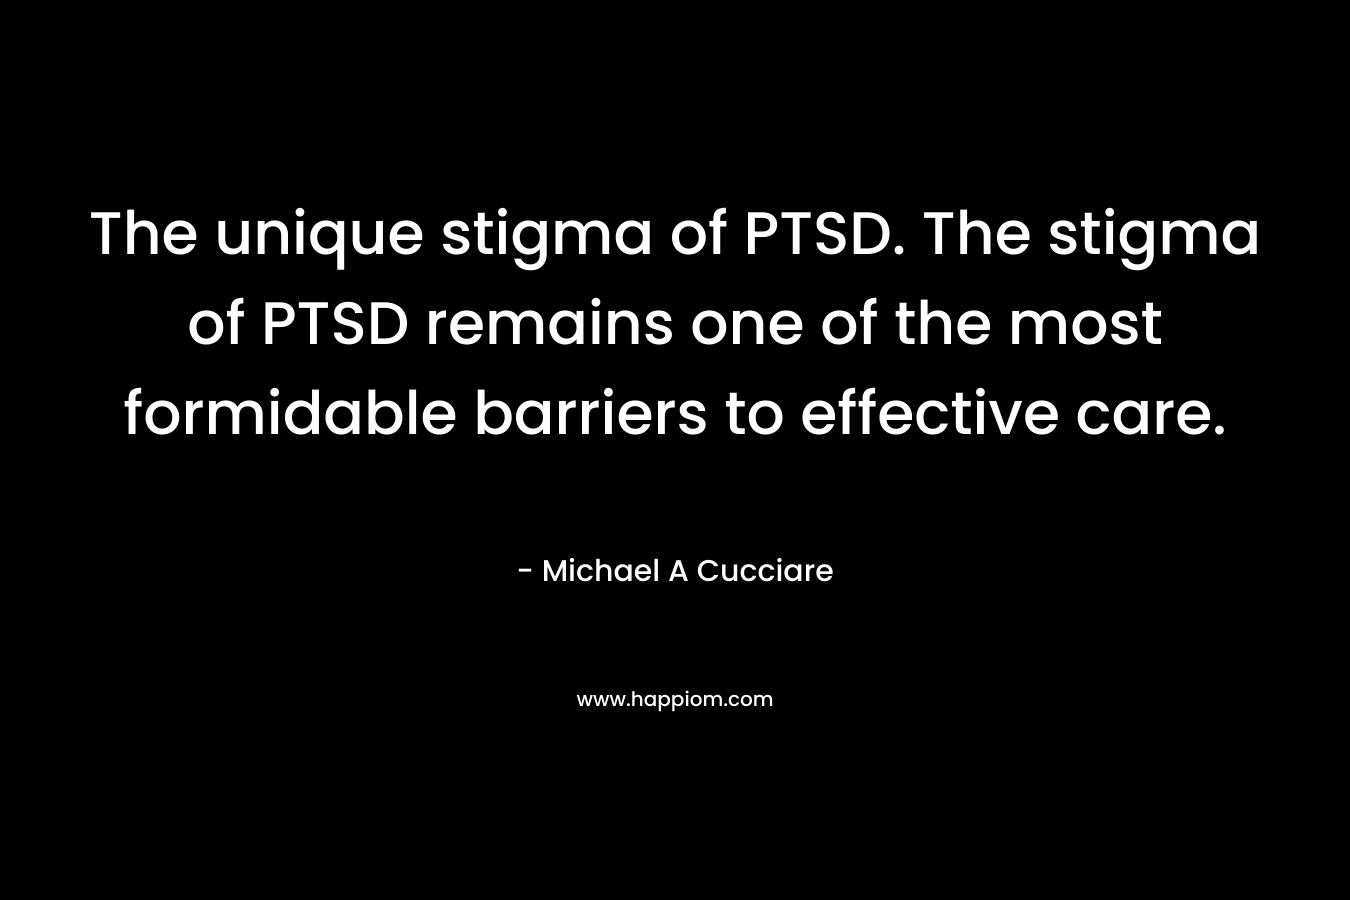 The unique stigma of PTSD. The stigma of PTSD remains one of the most formidable barriers to effective care.